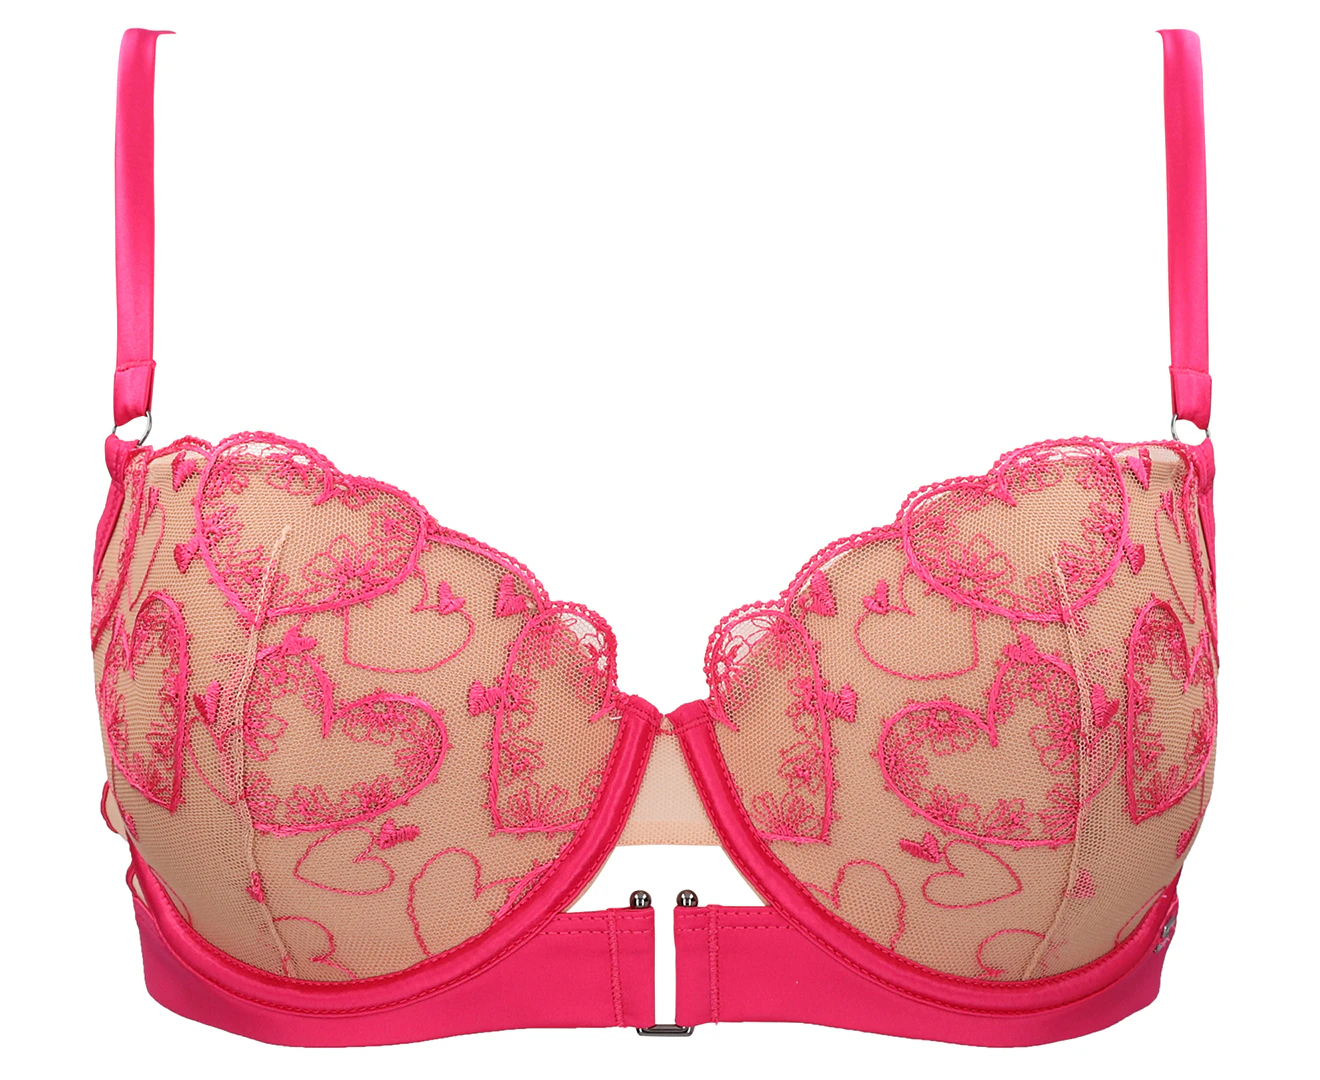 Meant To Be, Valentine's Day at Bendon Lingerie